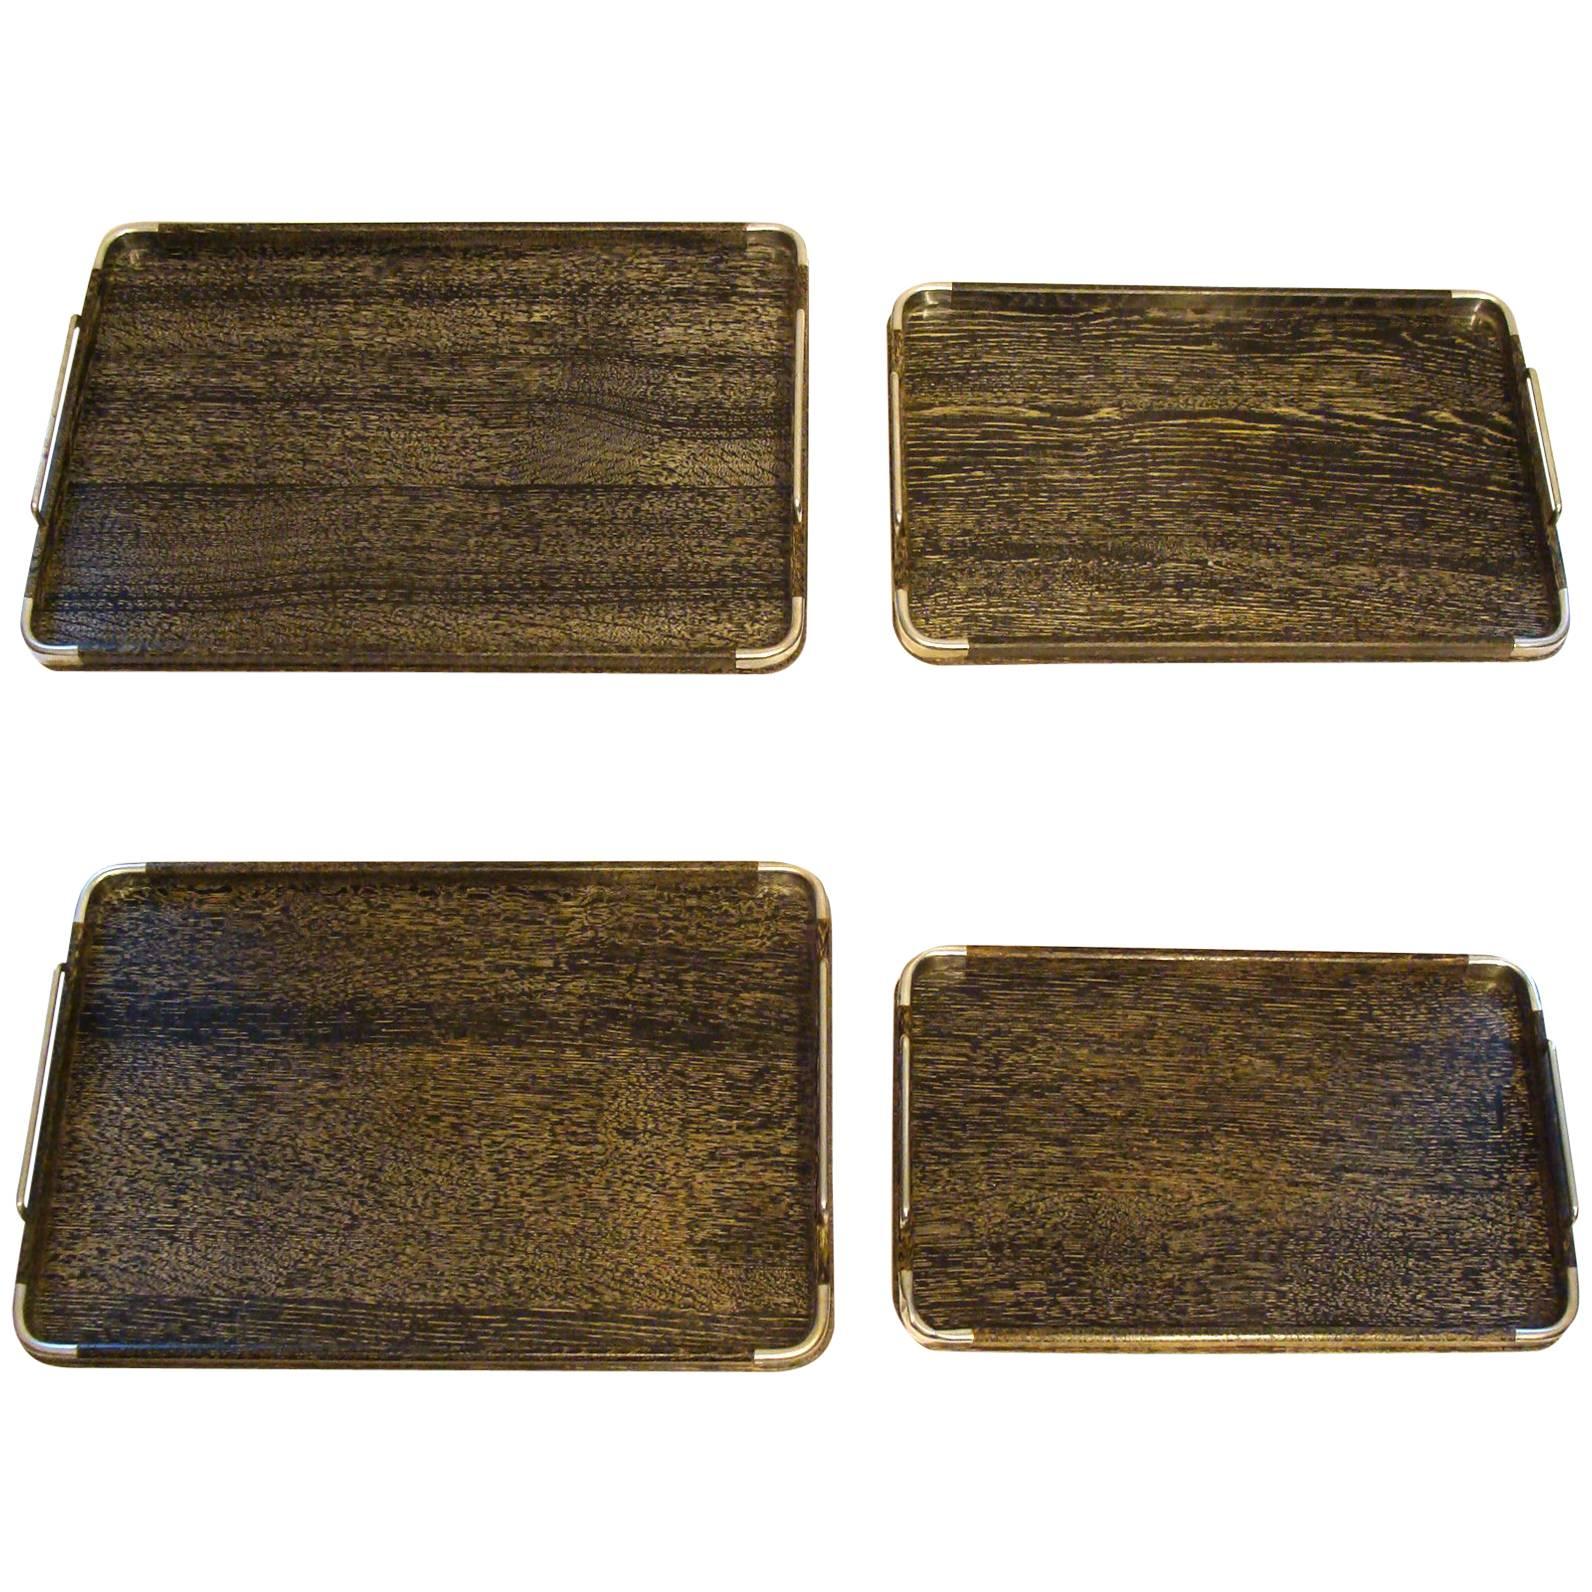 Gorgeous set of four trays, circa 1950-1955 in ebonized/cerused oak with chrome handles and trim. A complete set in great original condition showing very light wear and no corrosion. {These are far superior to the more common trays with bleached